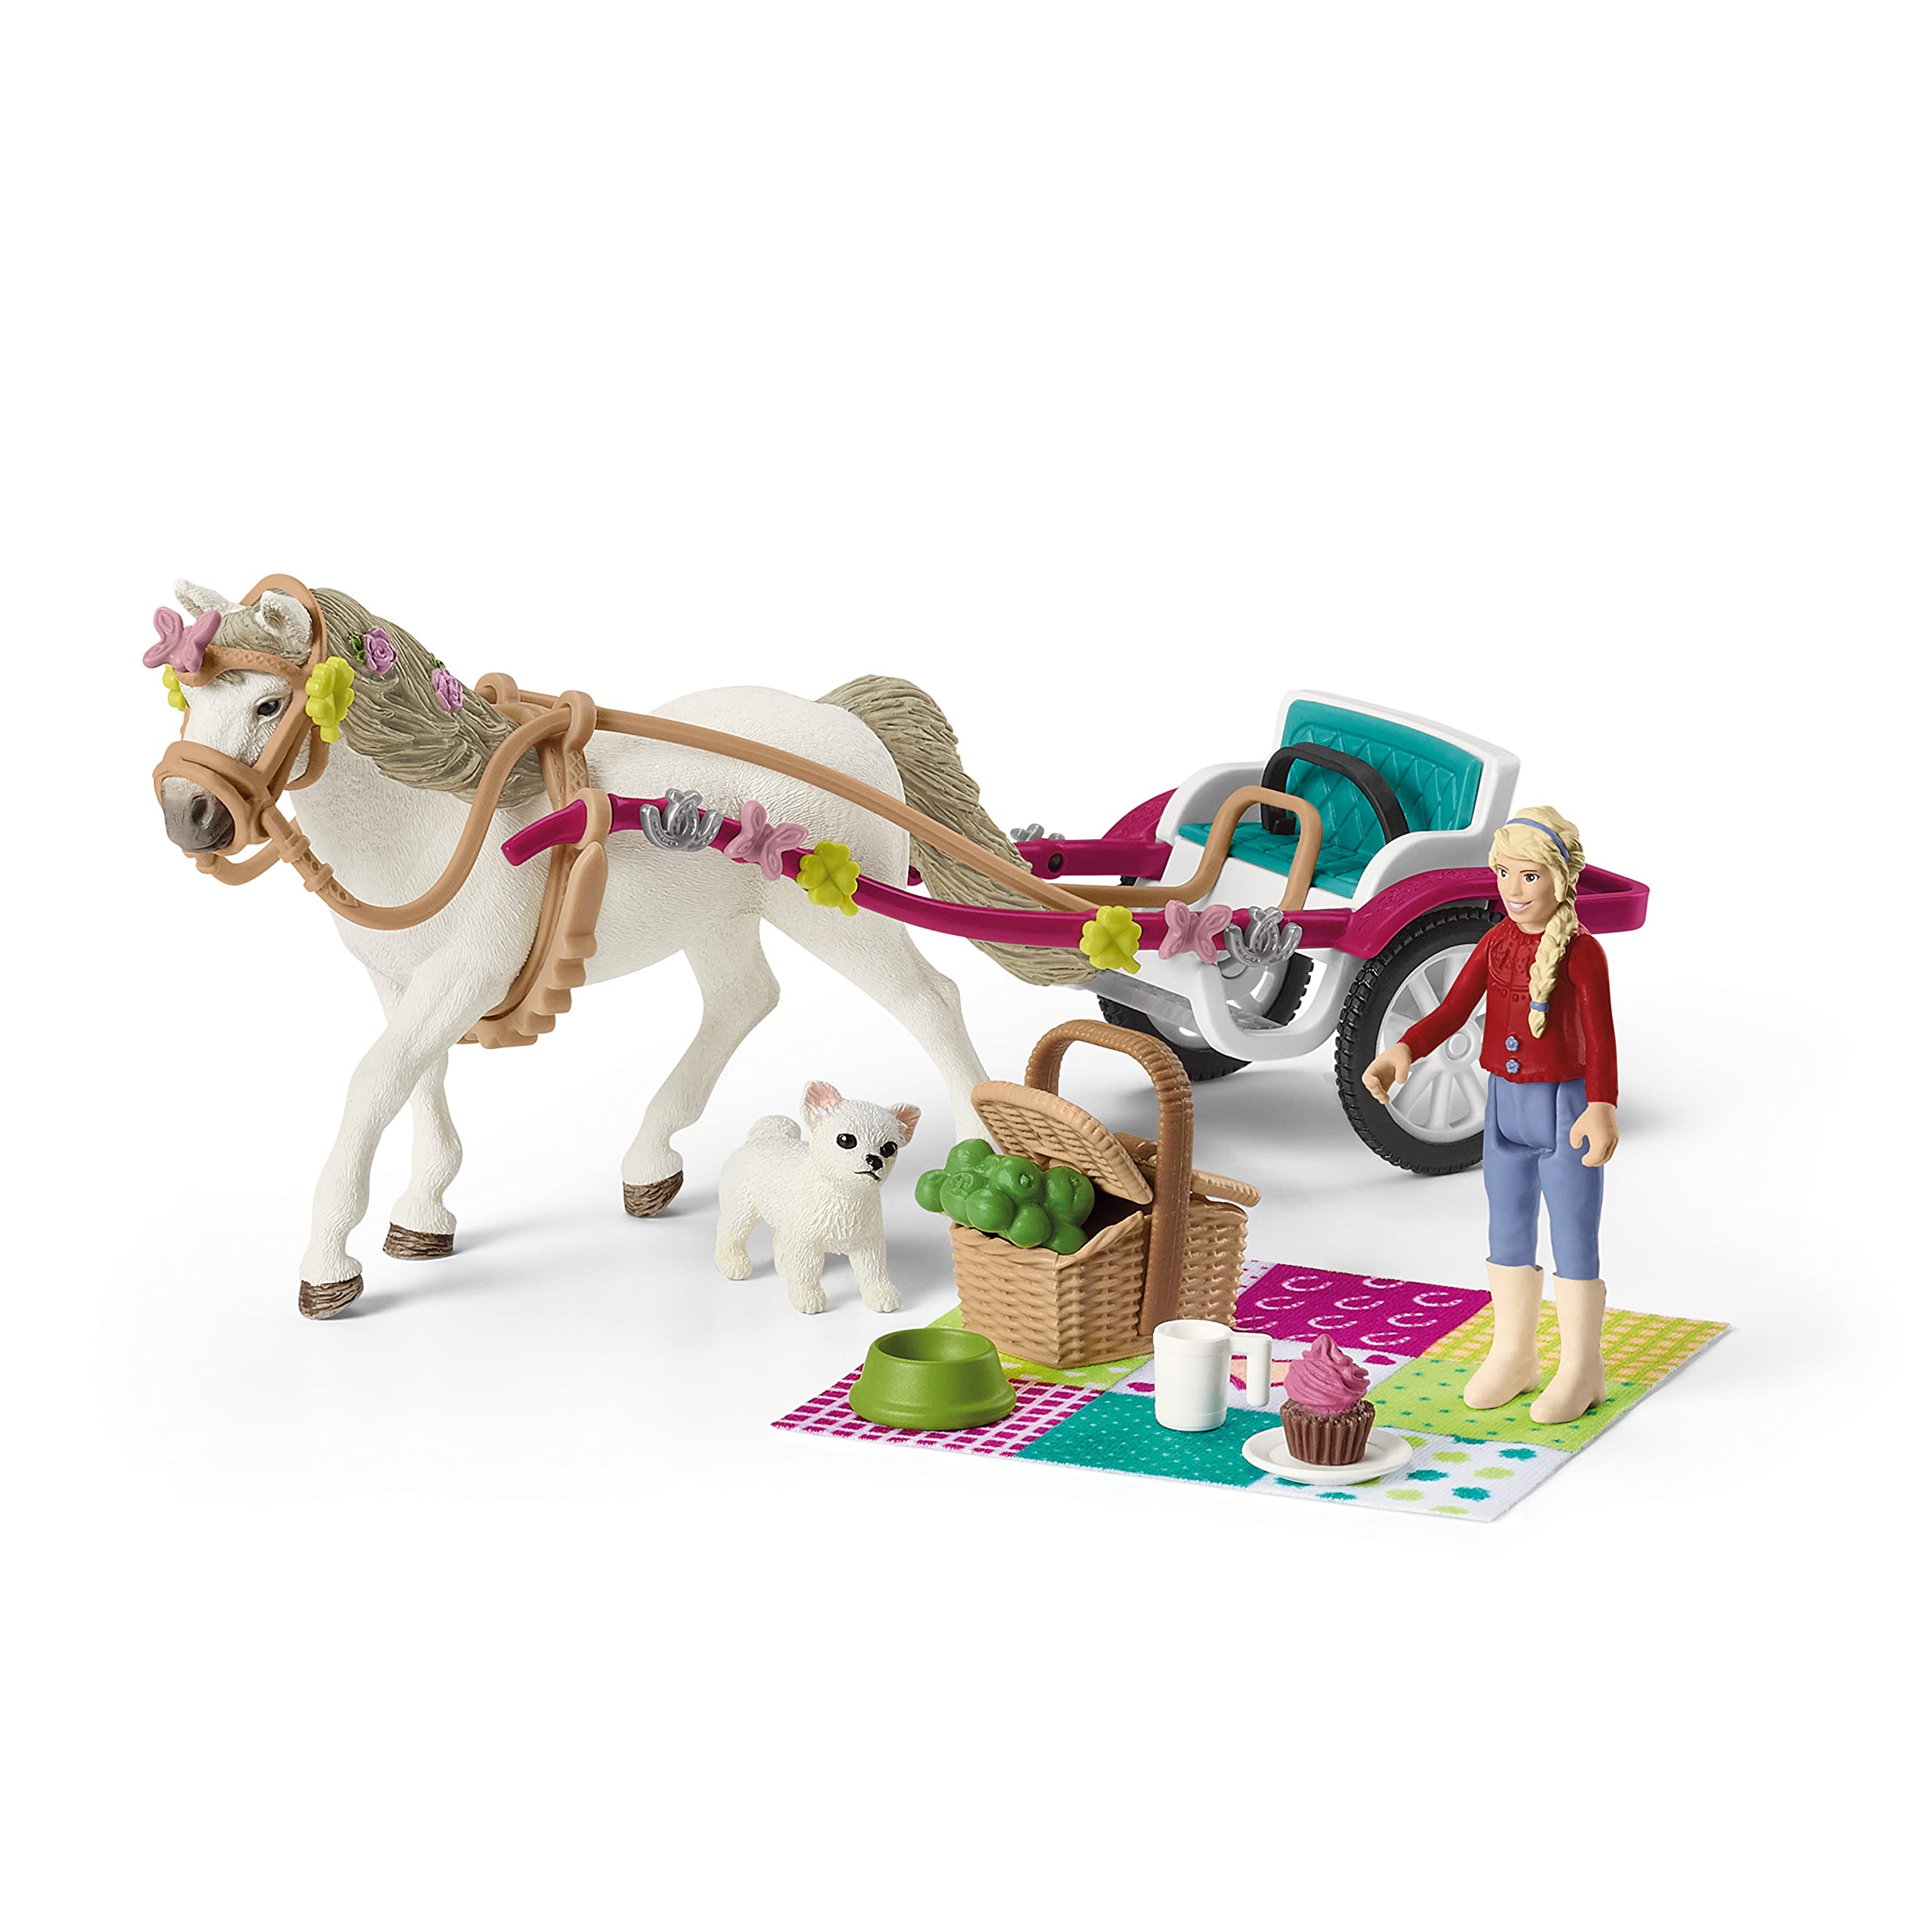 Schleich Horse Club, Horse Toys for Girls and Boys, Carriage Ride with Picnic Horse Set with Horse Toy, 32 Pieces